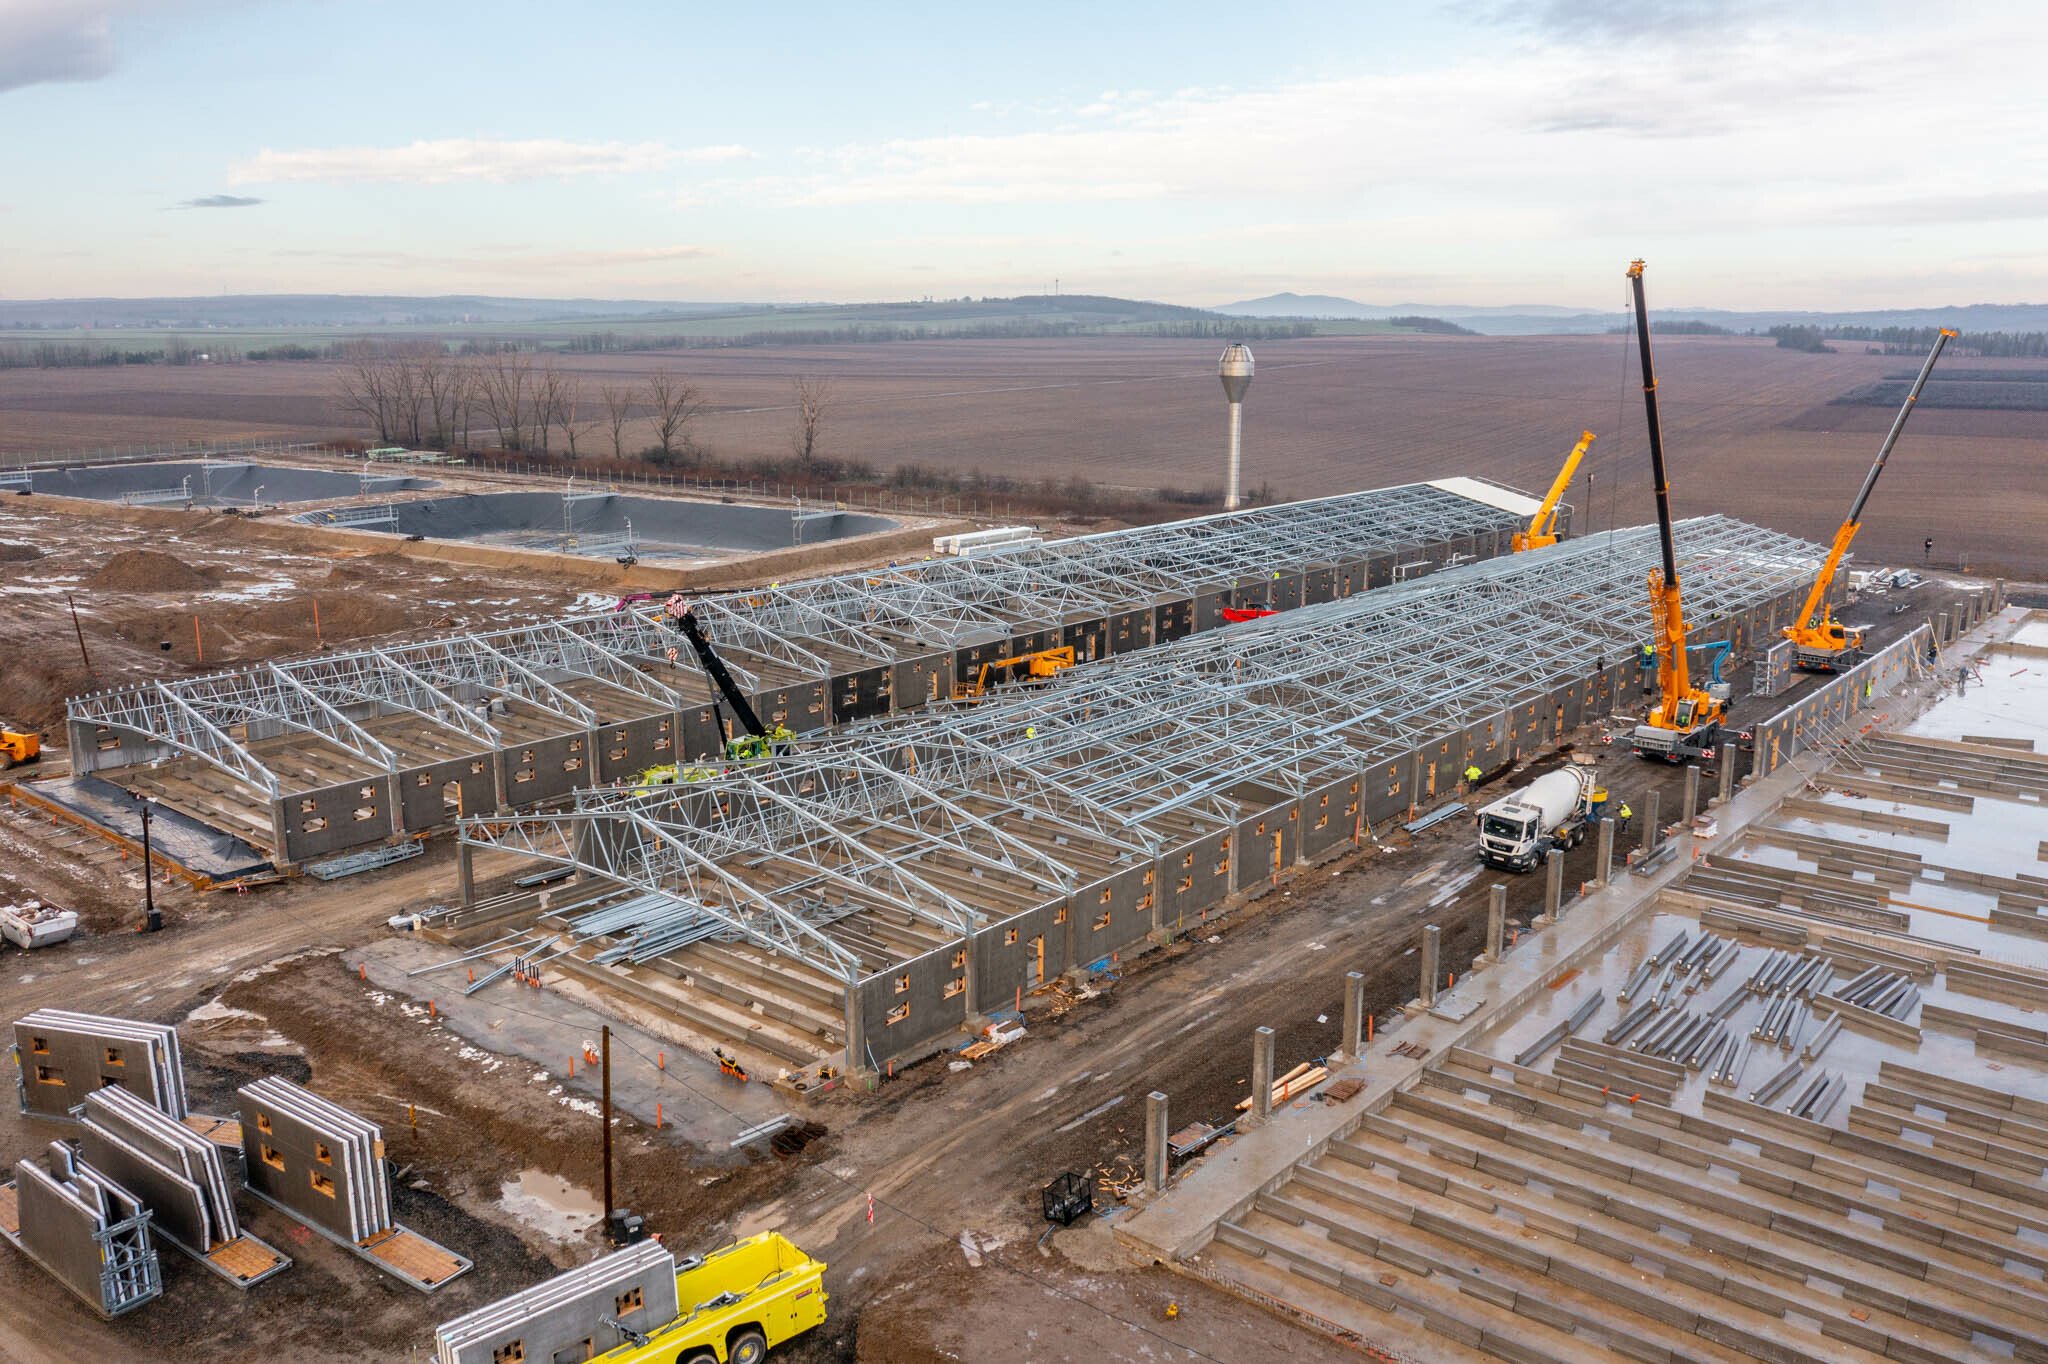 A major investment is being made near Mohacs, with the many advantages of prefabrication